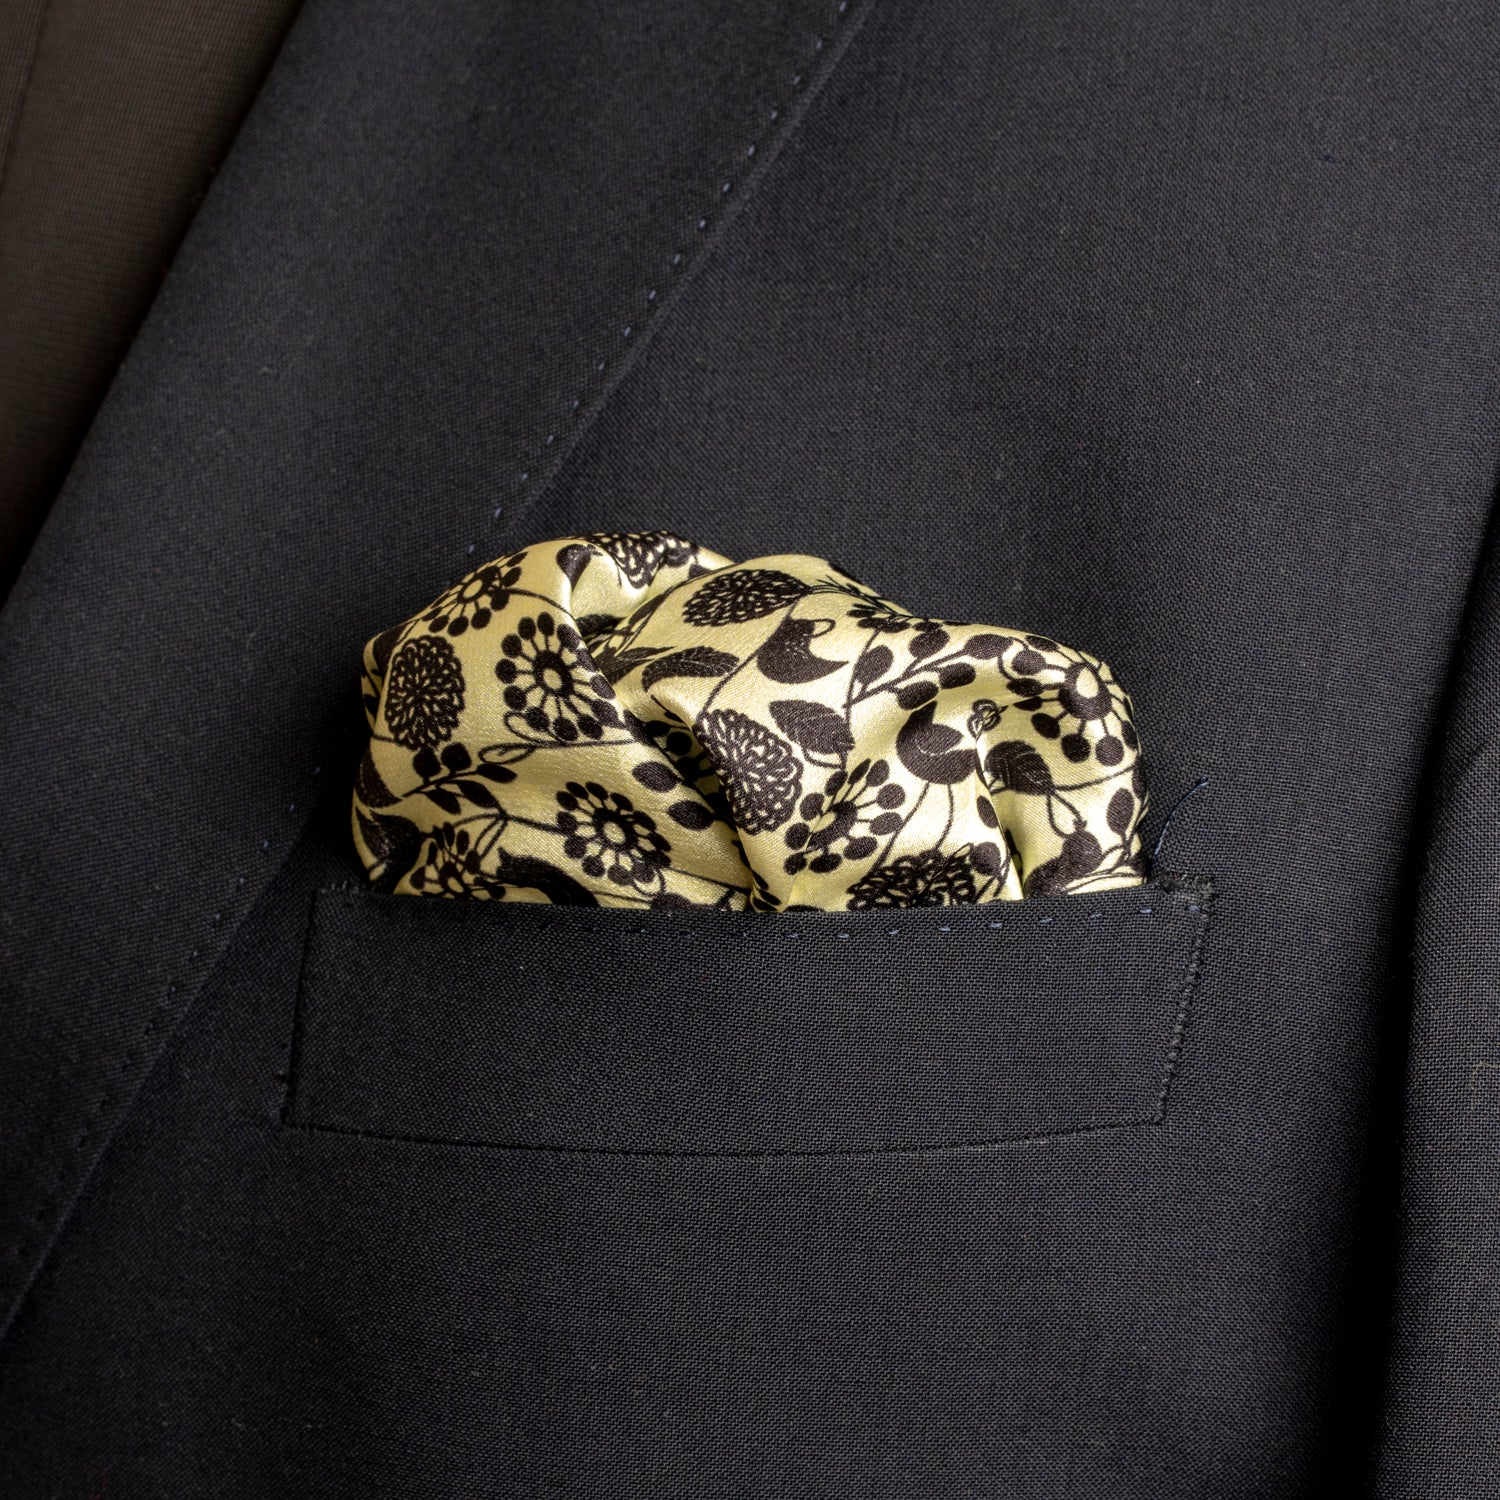 Chokore Black and White Satin Silk pocket square from the Wildlife Collection